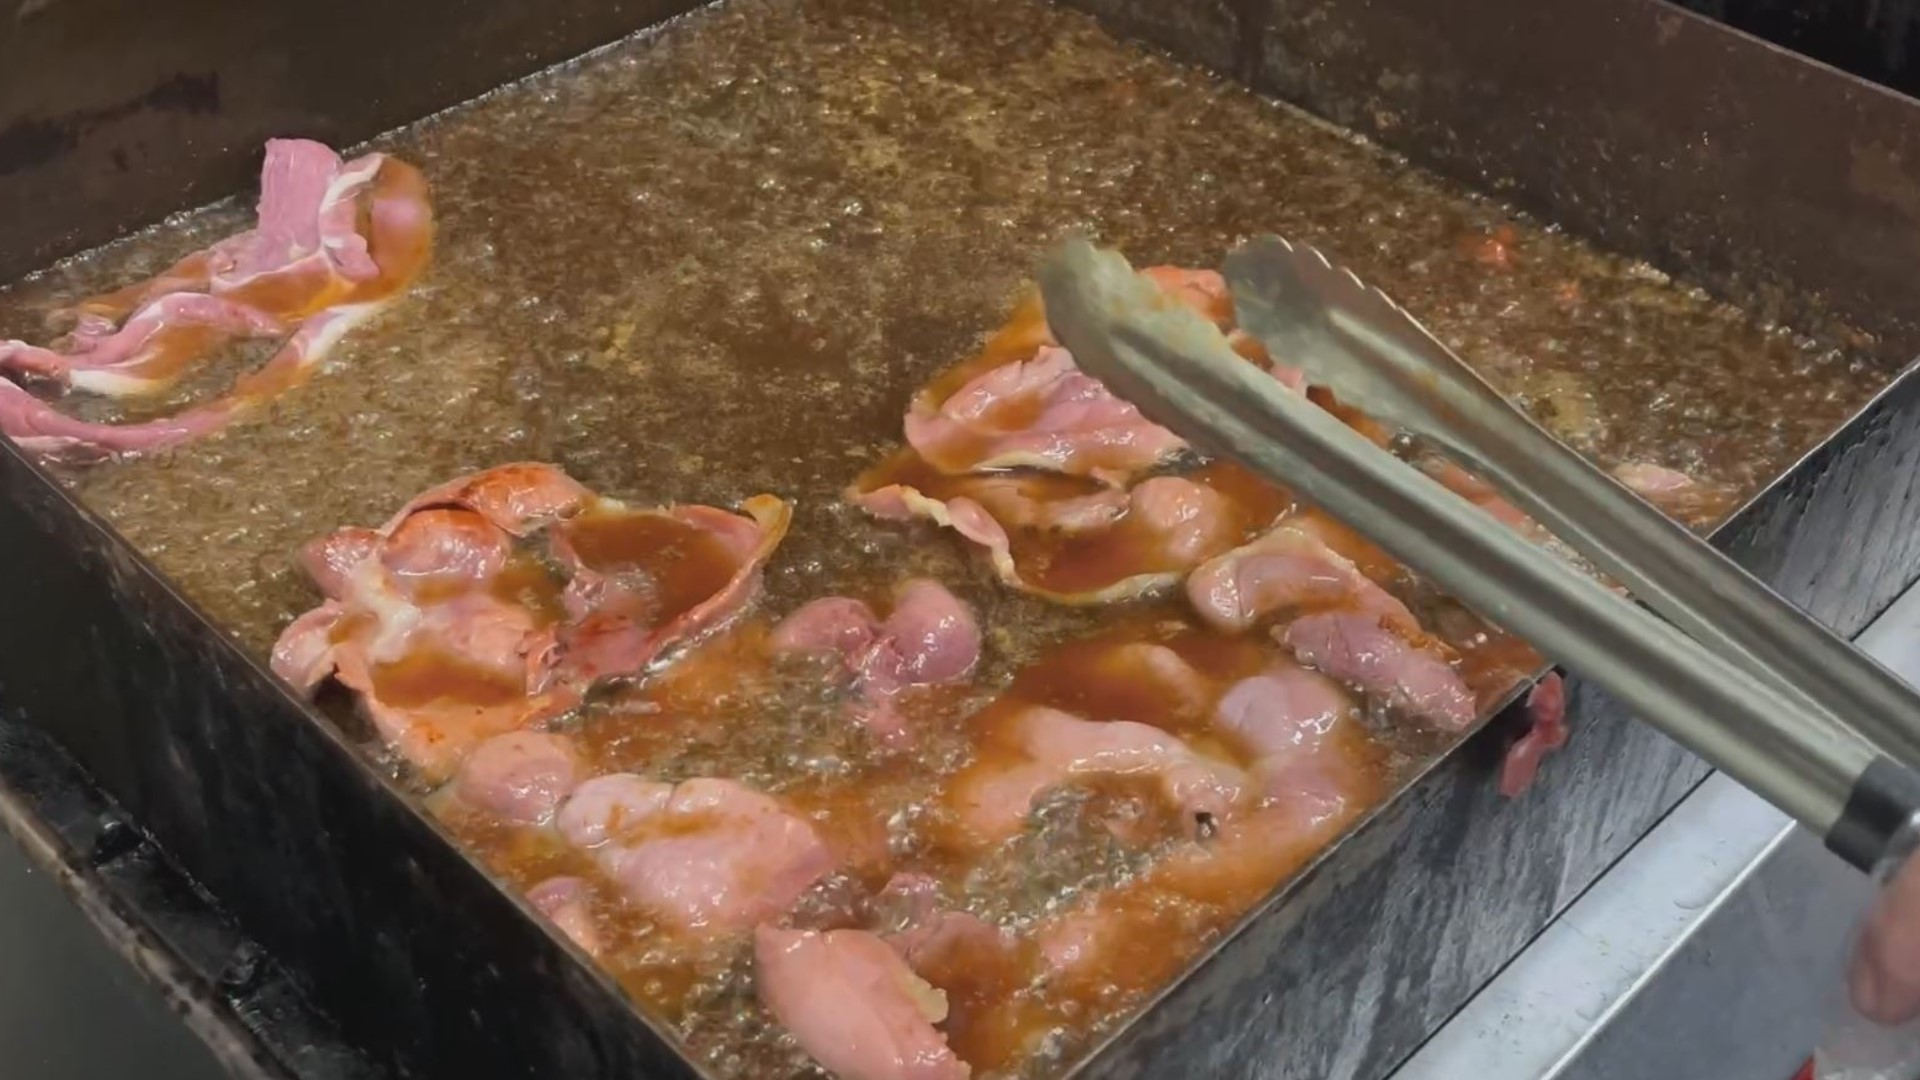 The Marion County festival serves up more than 4,000 pounds of country ham during their annual breakfast and also features, parades, vendors and more.